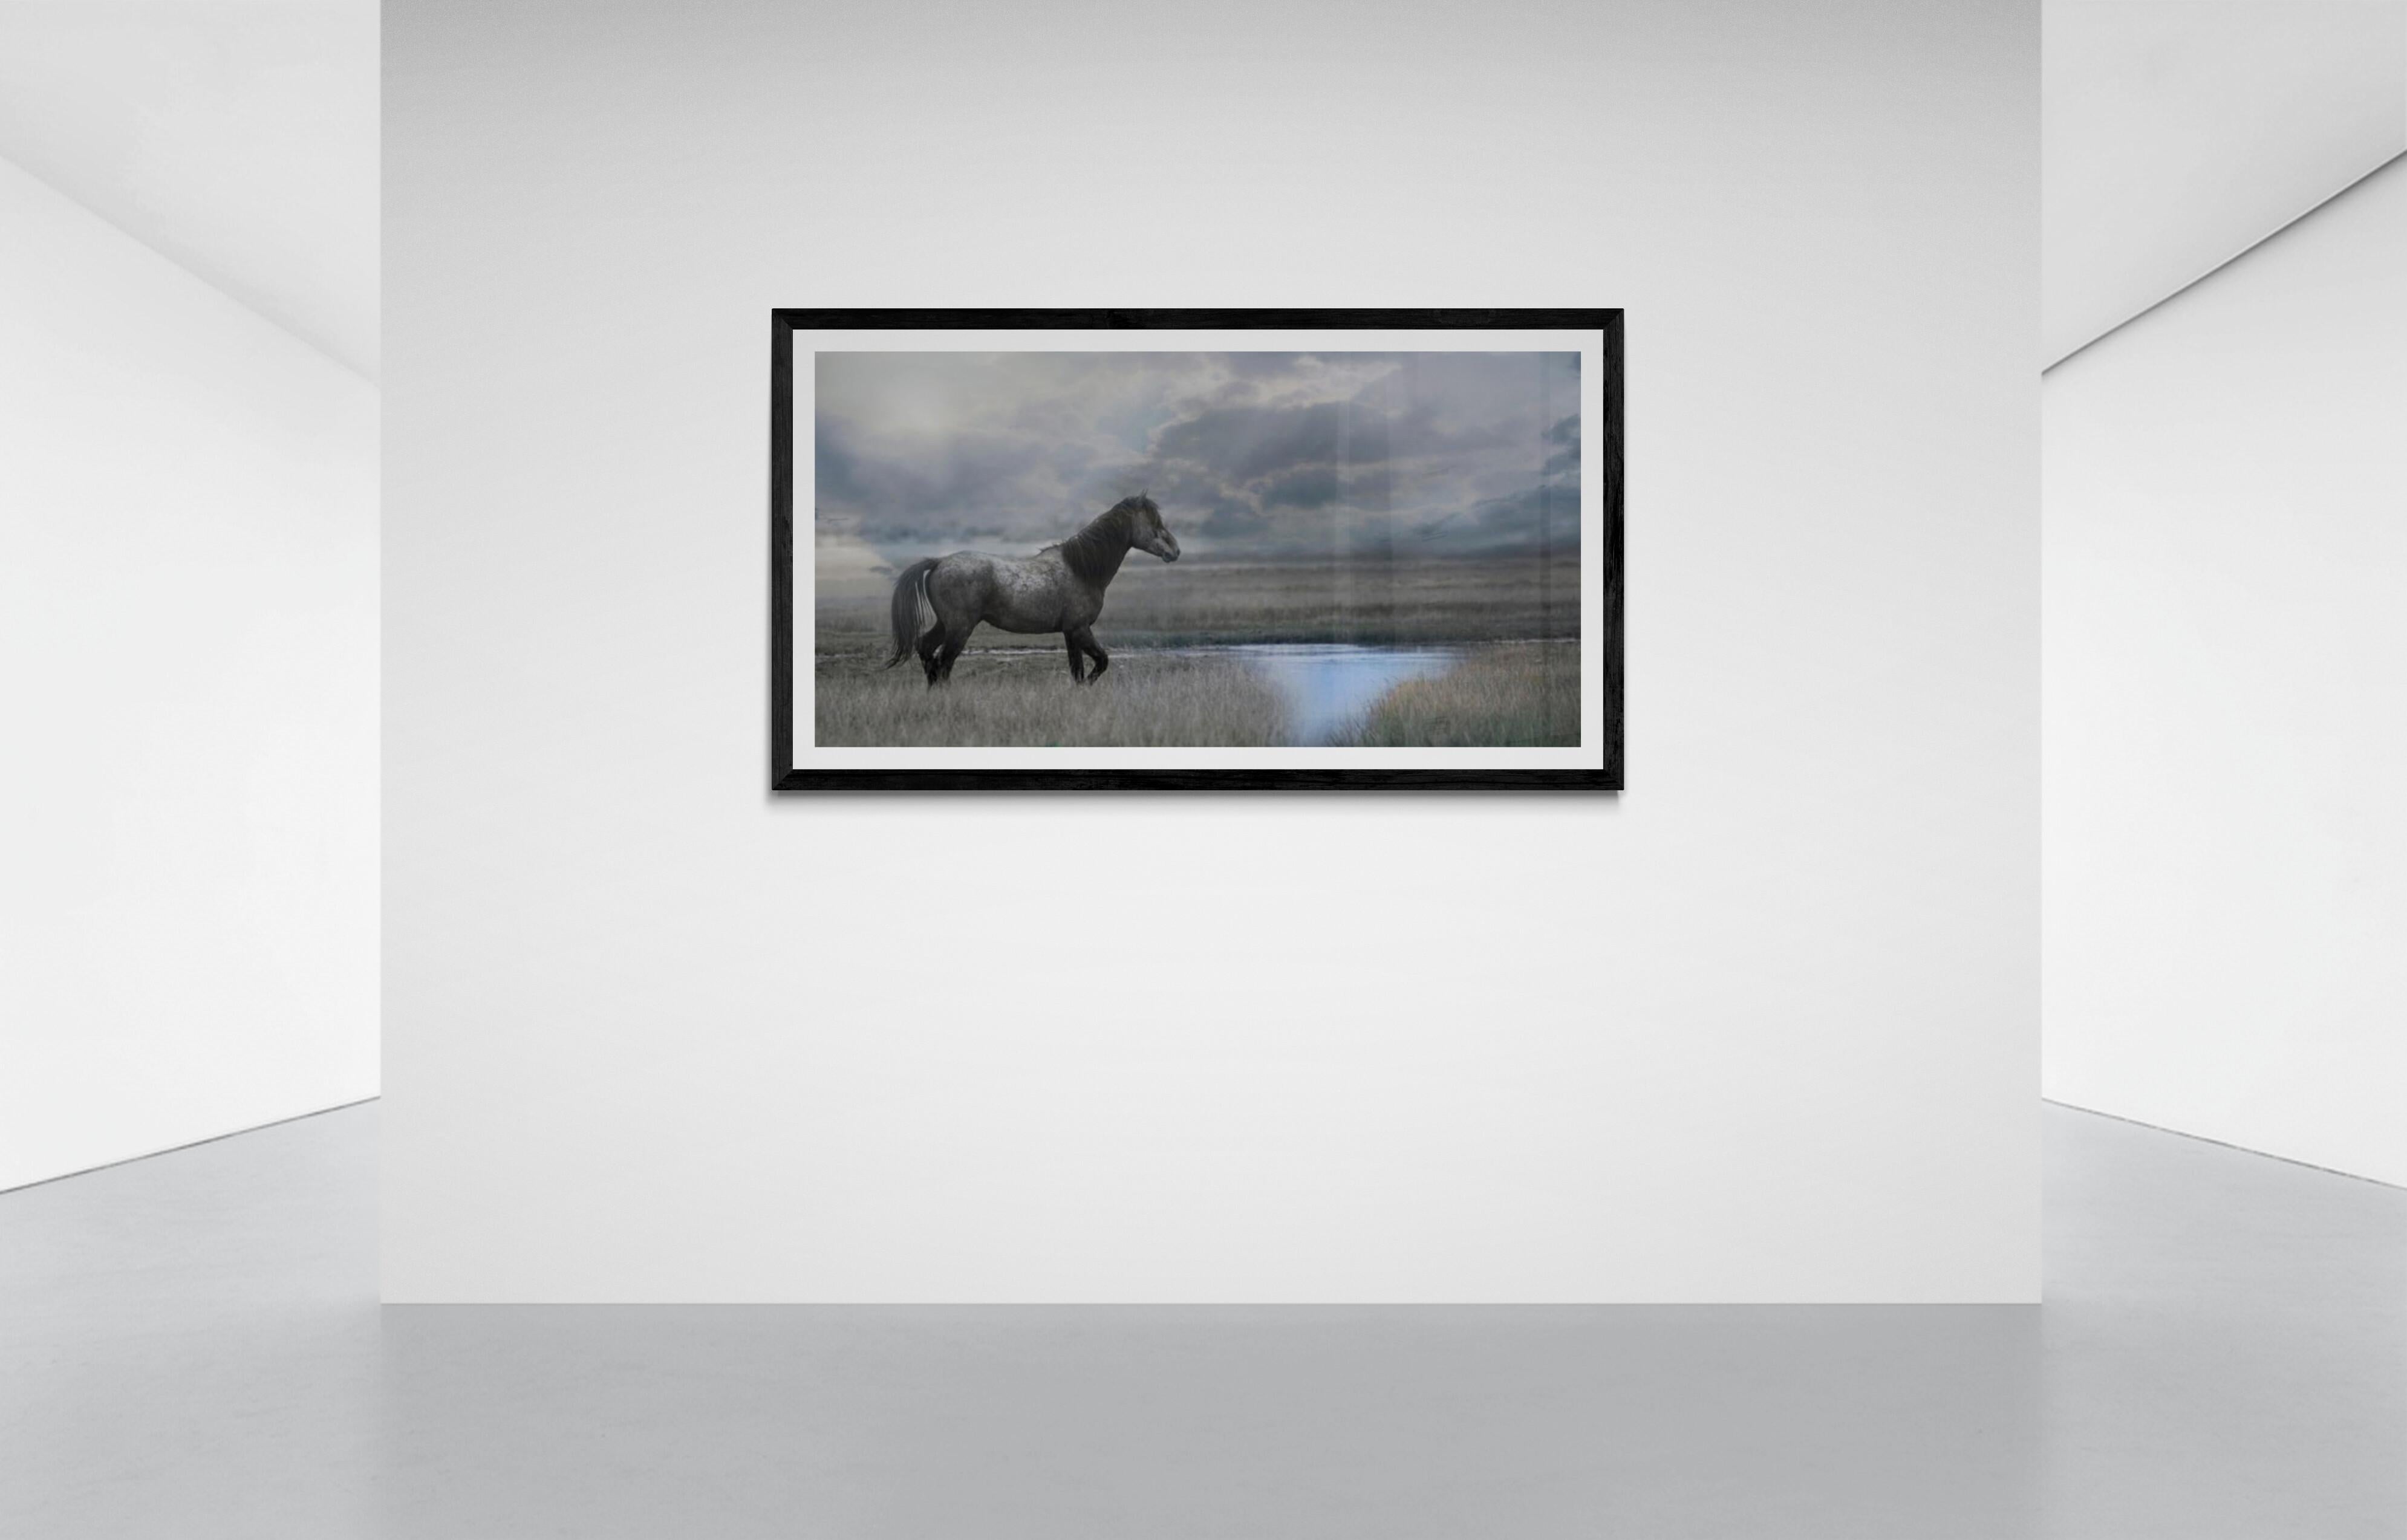 « Once Upon a Time in the West »  Photographie 30x60 de chevaux moutons sauvages - Art en vente 3